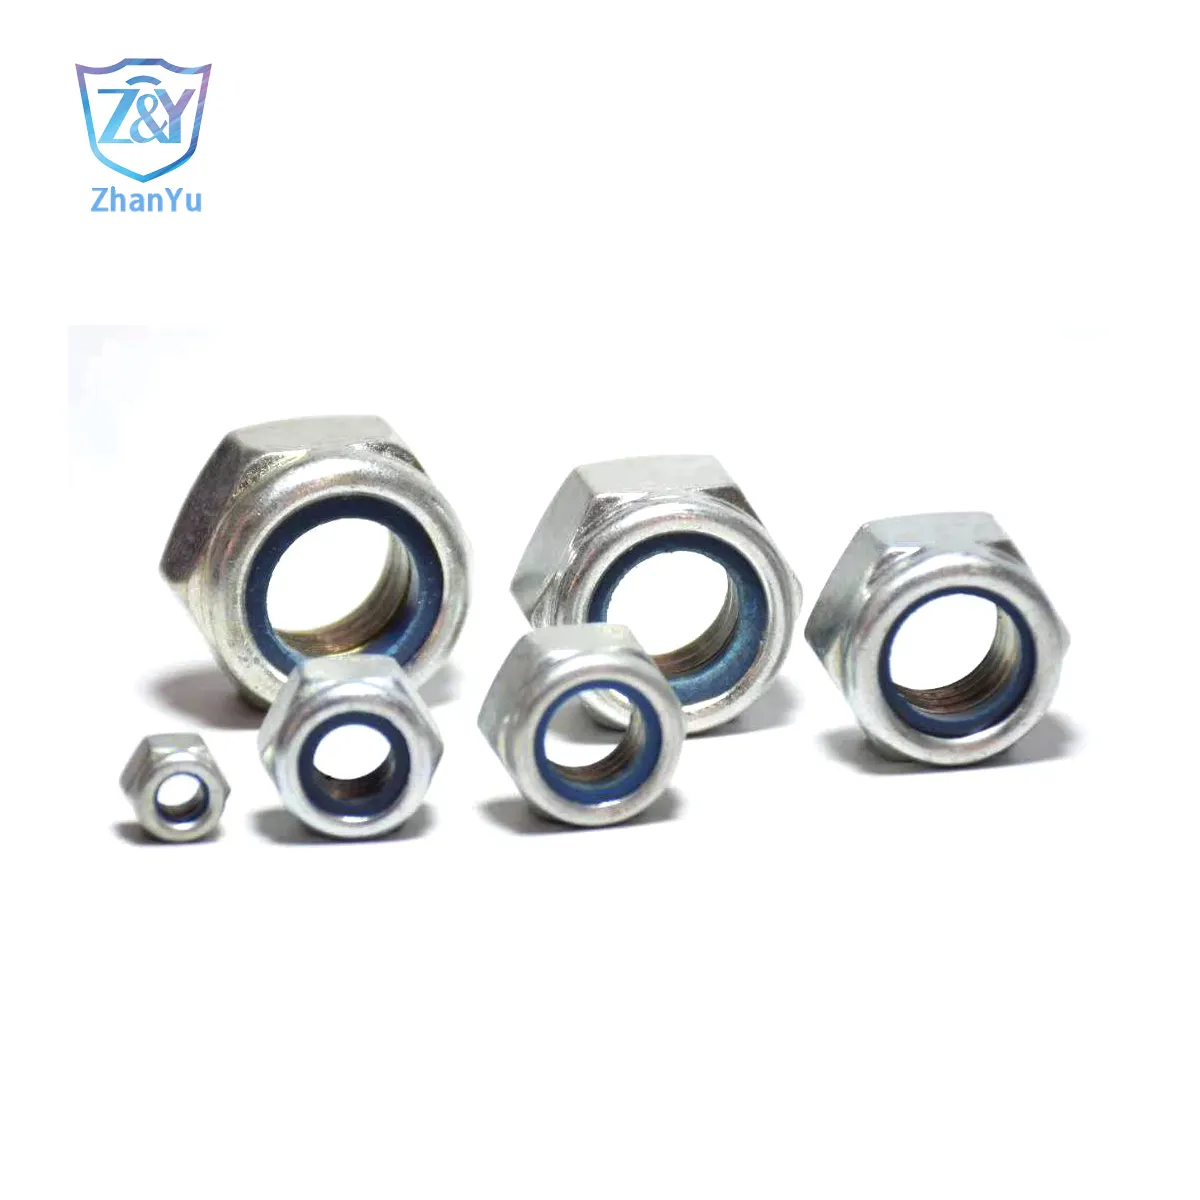 High quality DIN985 DIN982 carbon steel white yellow zinc stainless steel hex nylon lock nut with non-metallic insert